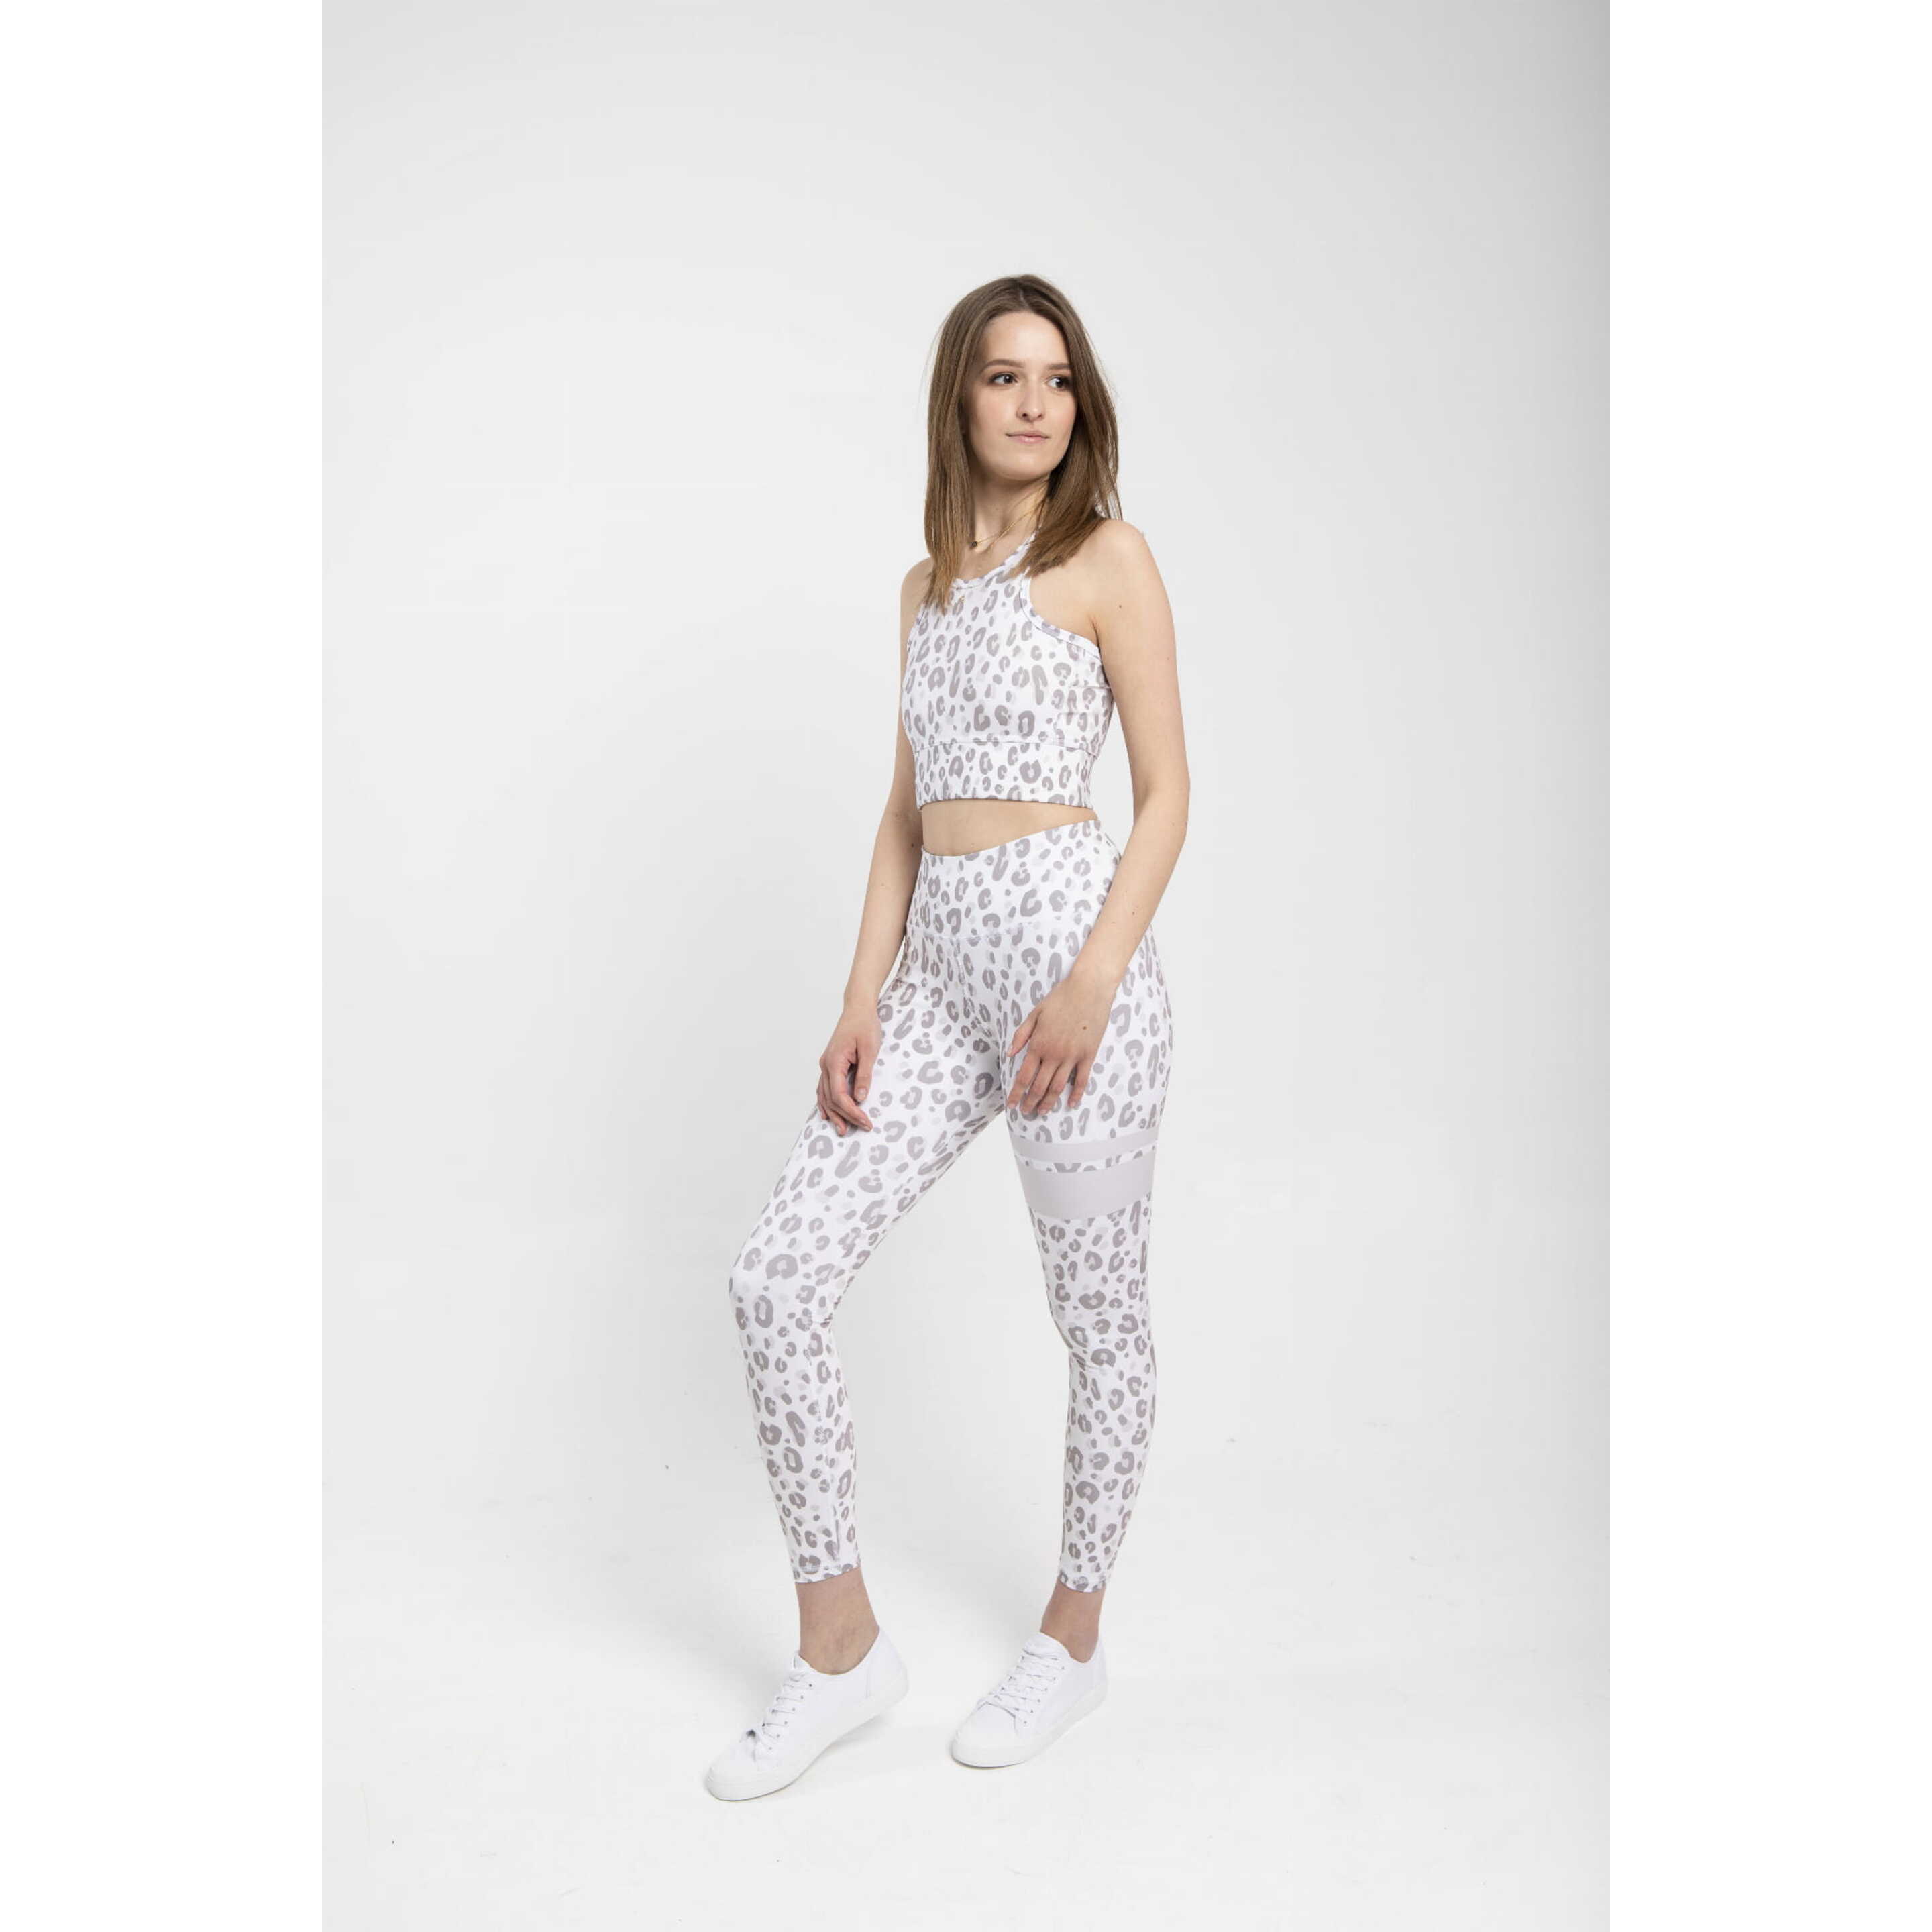 Top Deportivo Peachperfect Panther